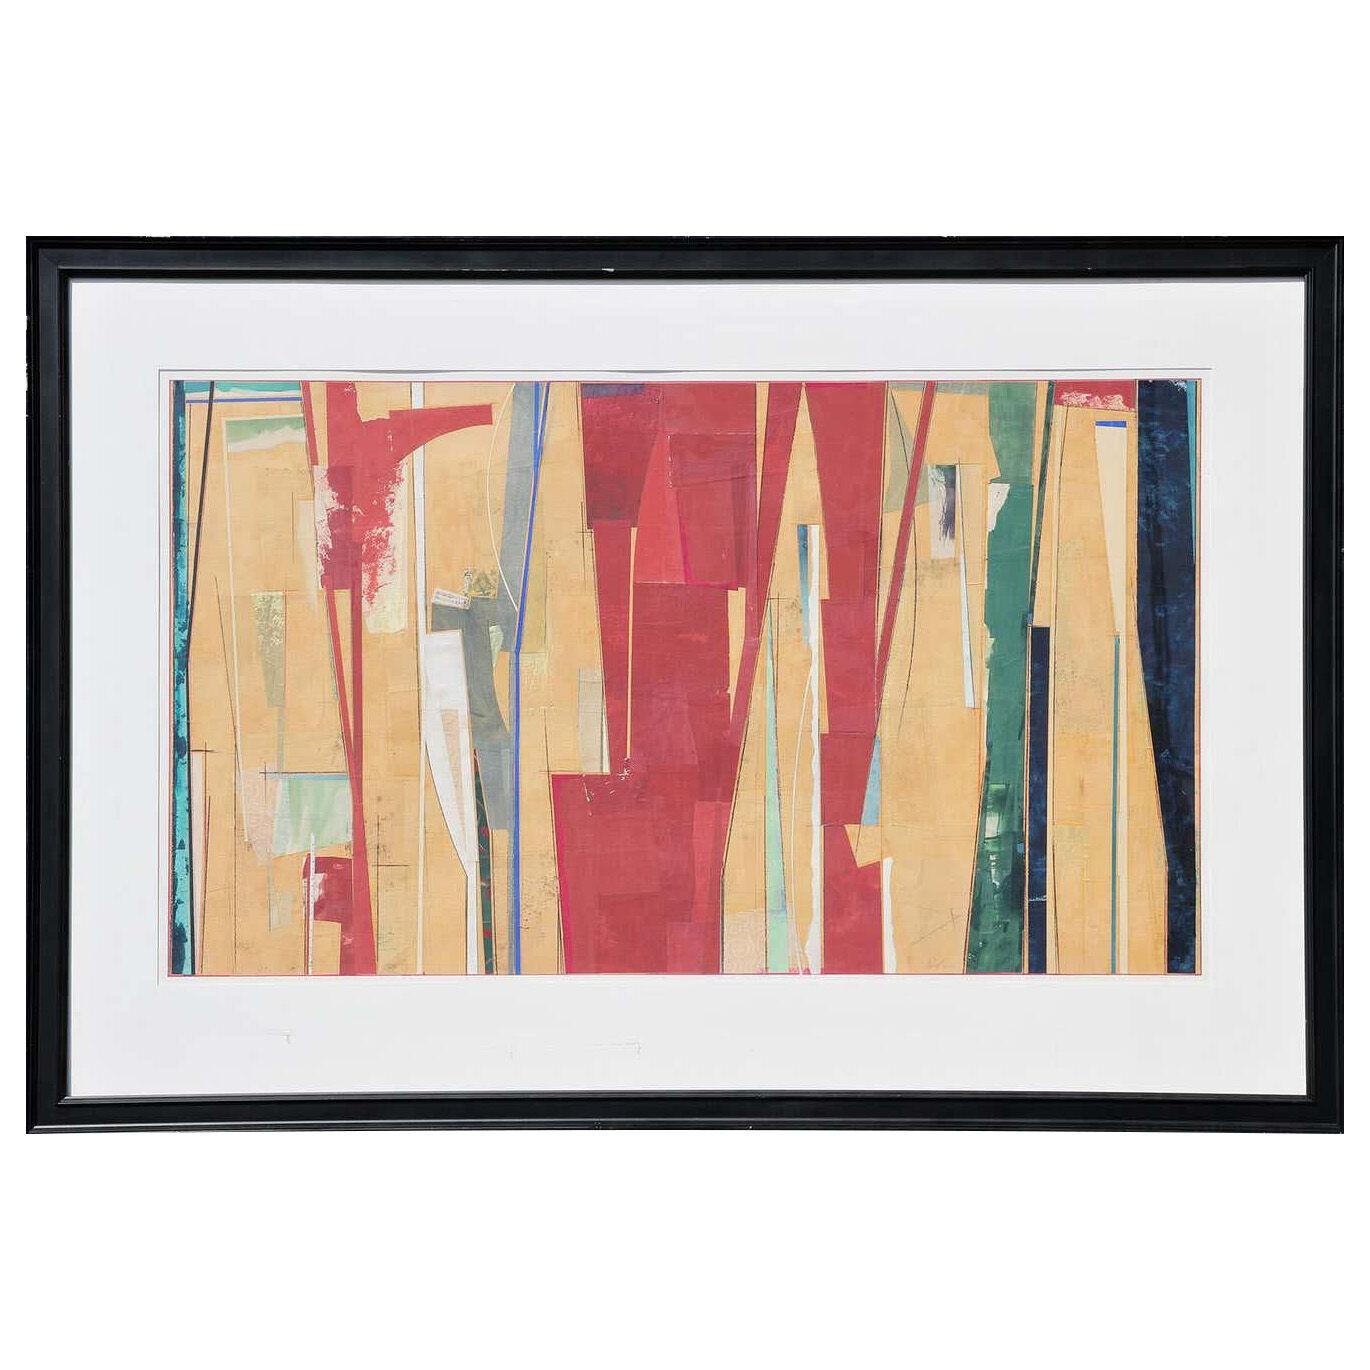 1980s Abstract Geometric Mixed-Media Collage Painting by John Pavlicek, Framed